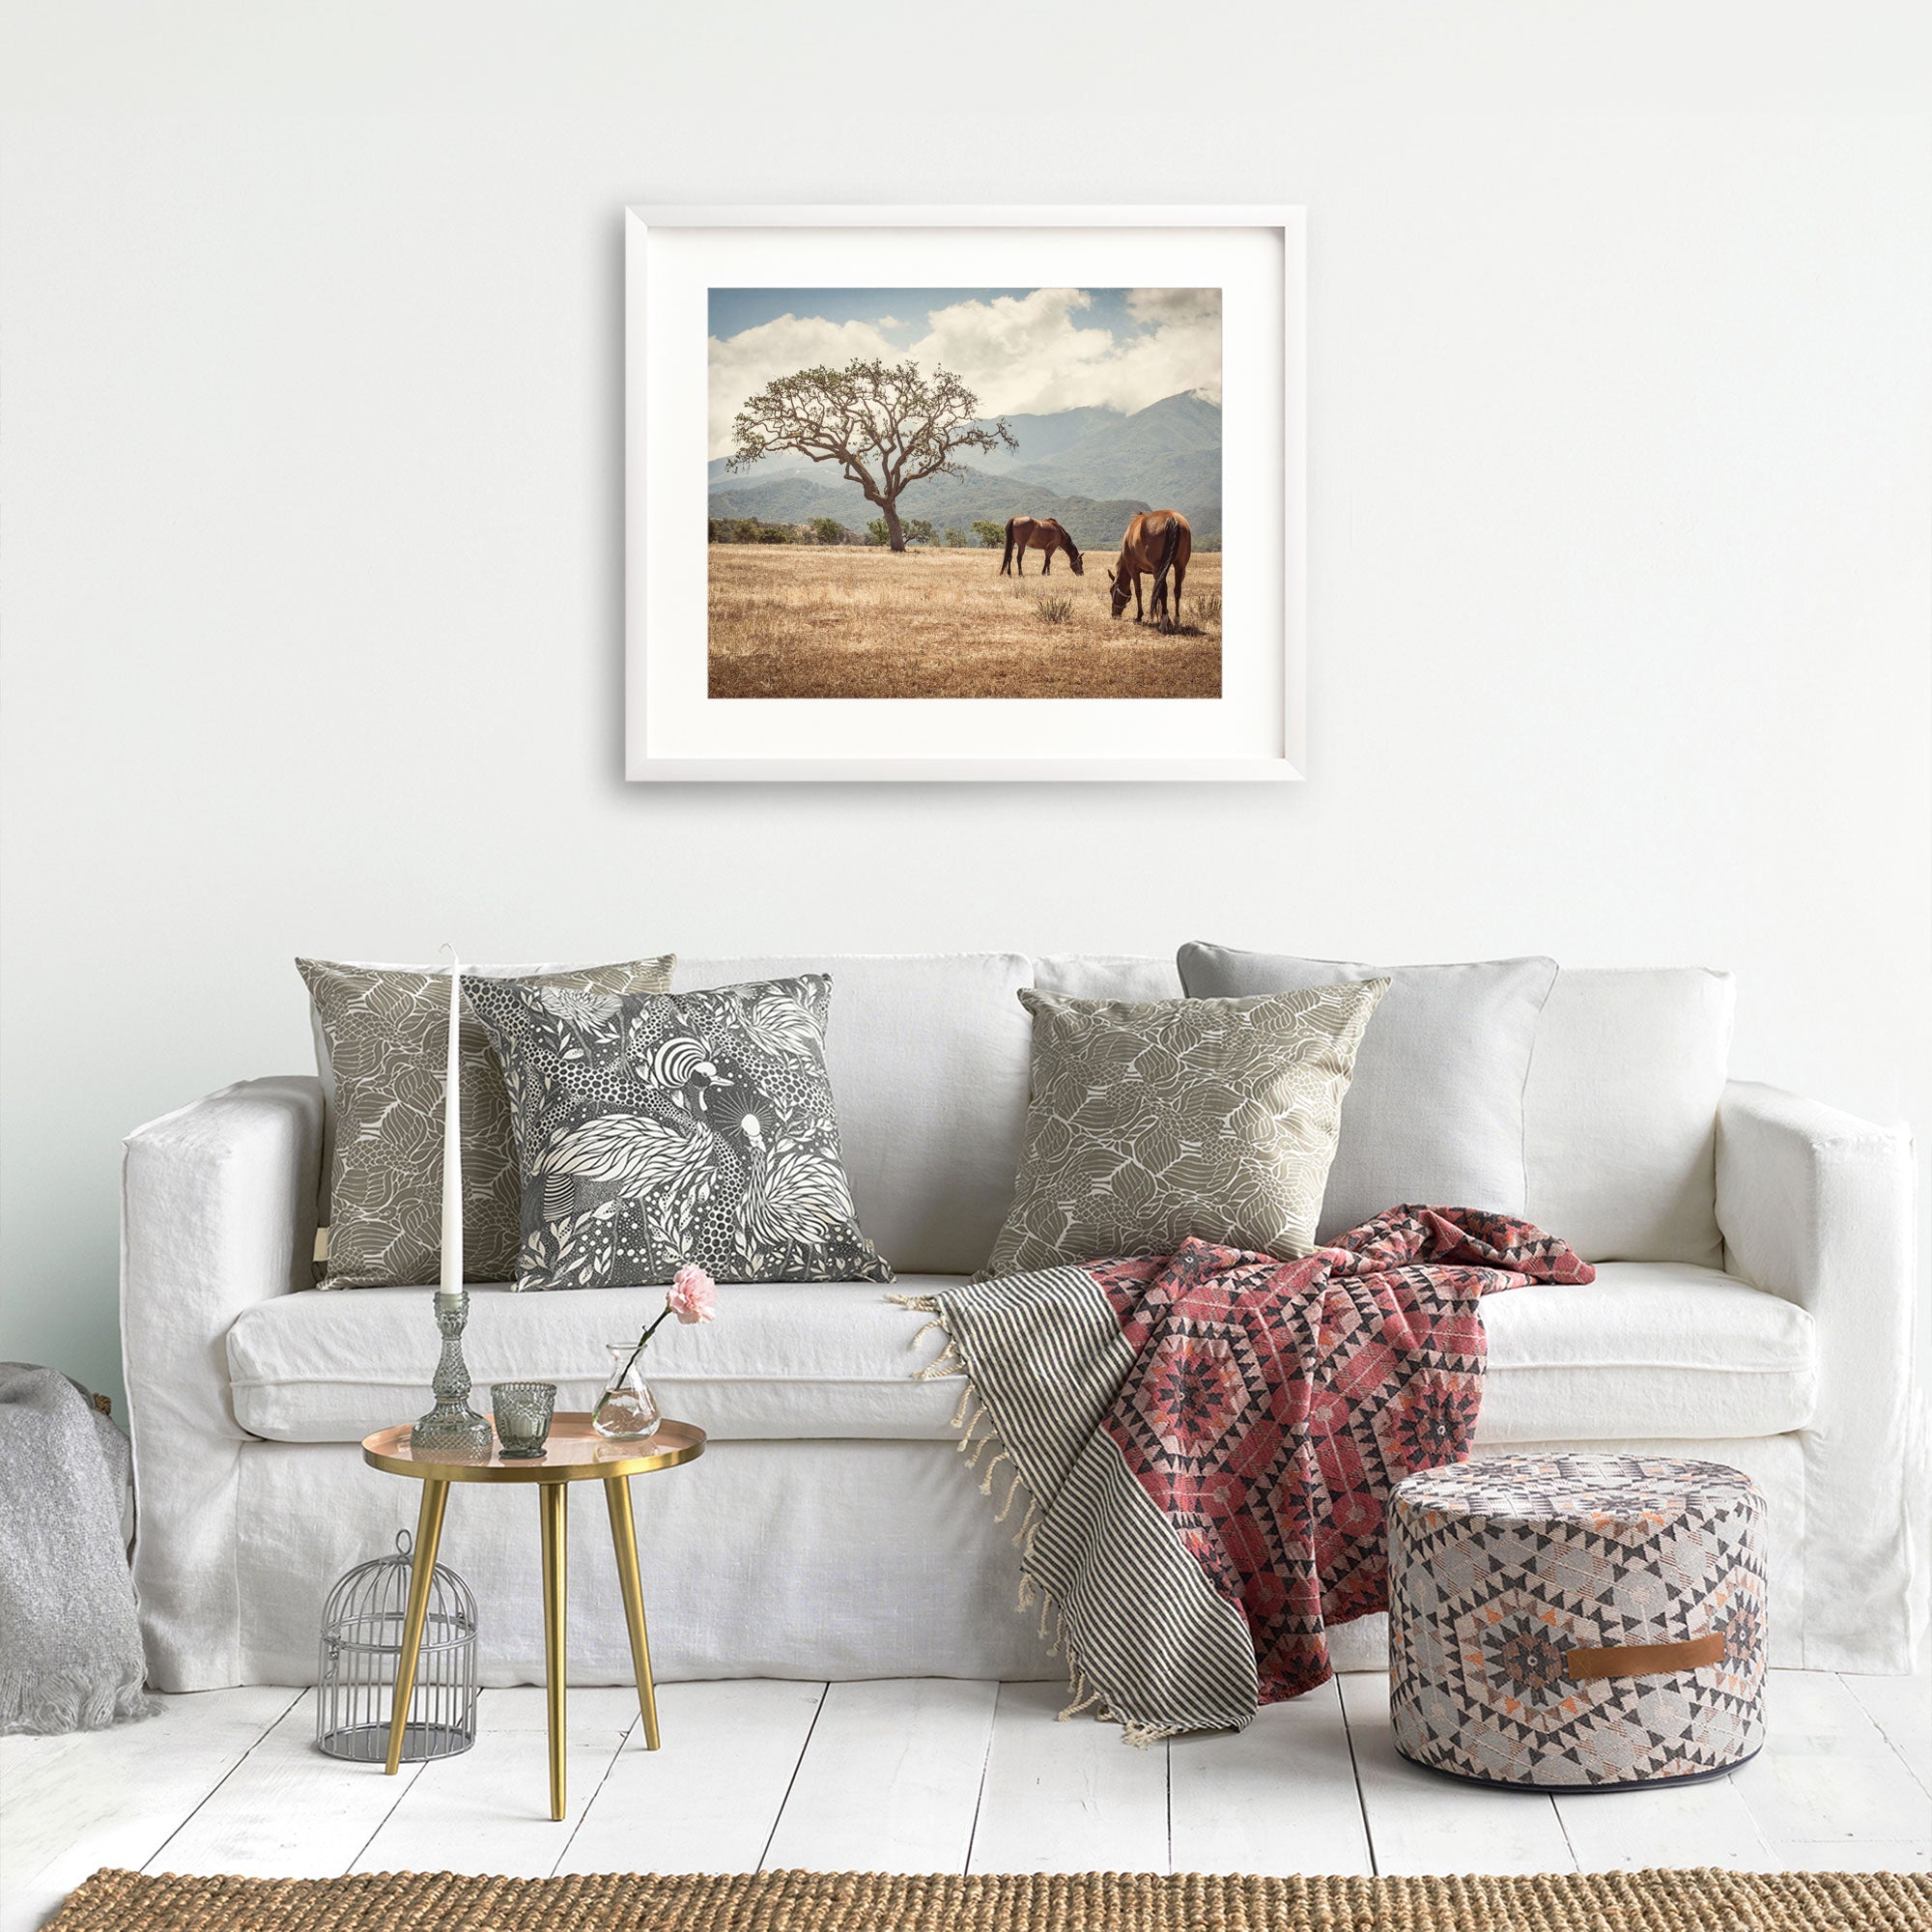 A cozy living room featuring a white sofa adorned with patterned cushions, a red throw, a small round table with decor items, and a framed rustic print of horses in a field titled &#39;Santa Ynez Horses&#39; by Offley Green.